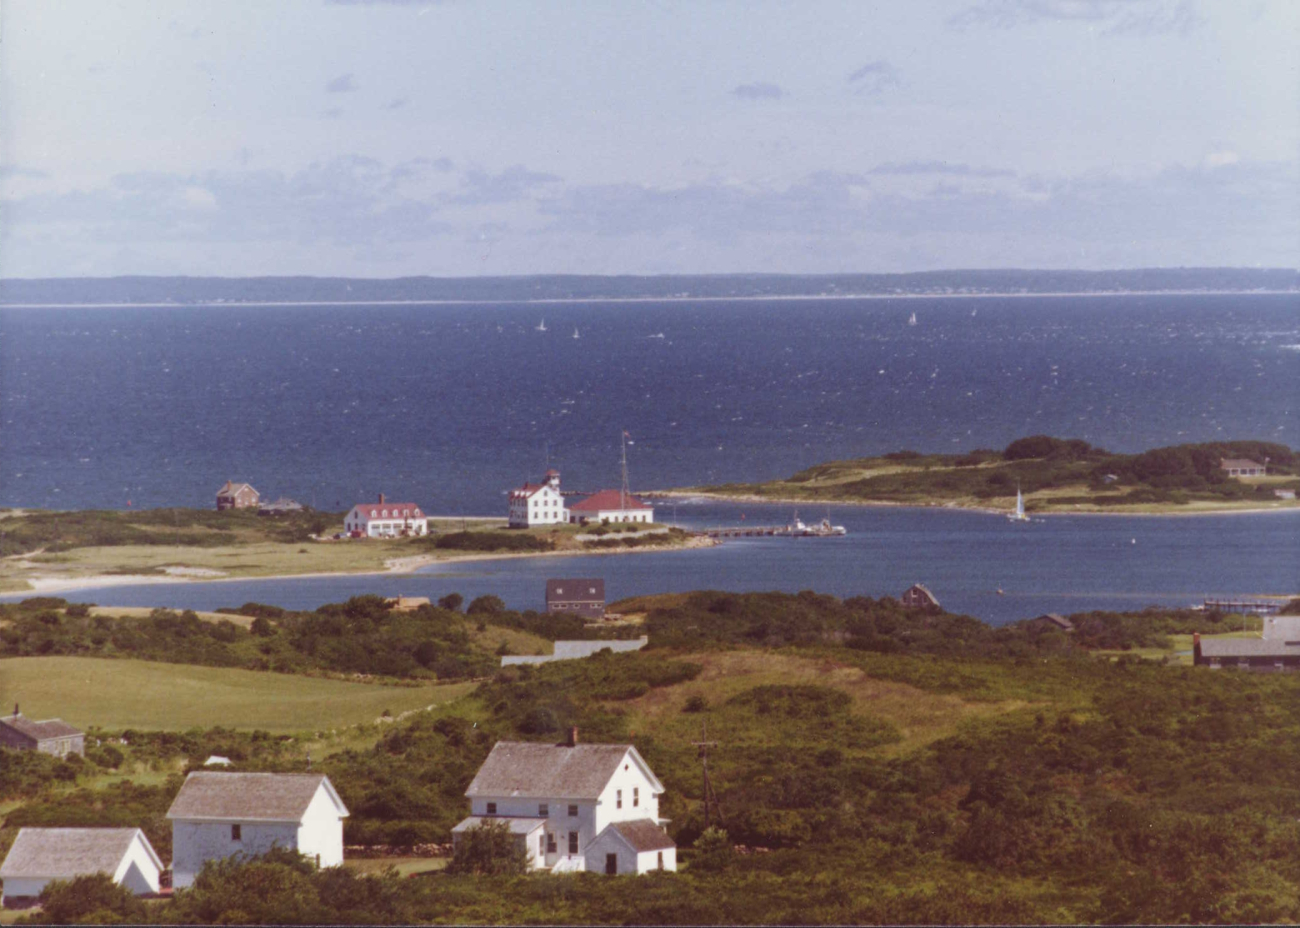 Long Island Sound from the old Weather Bureau building on Block Island